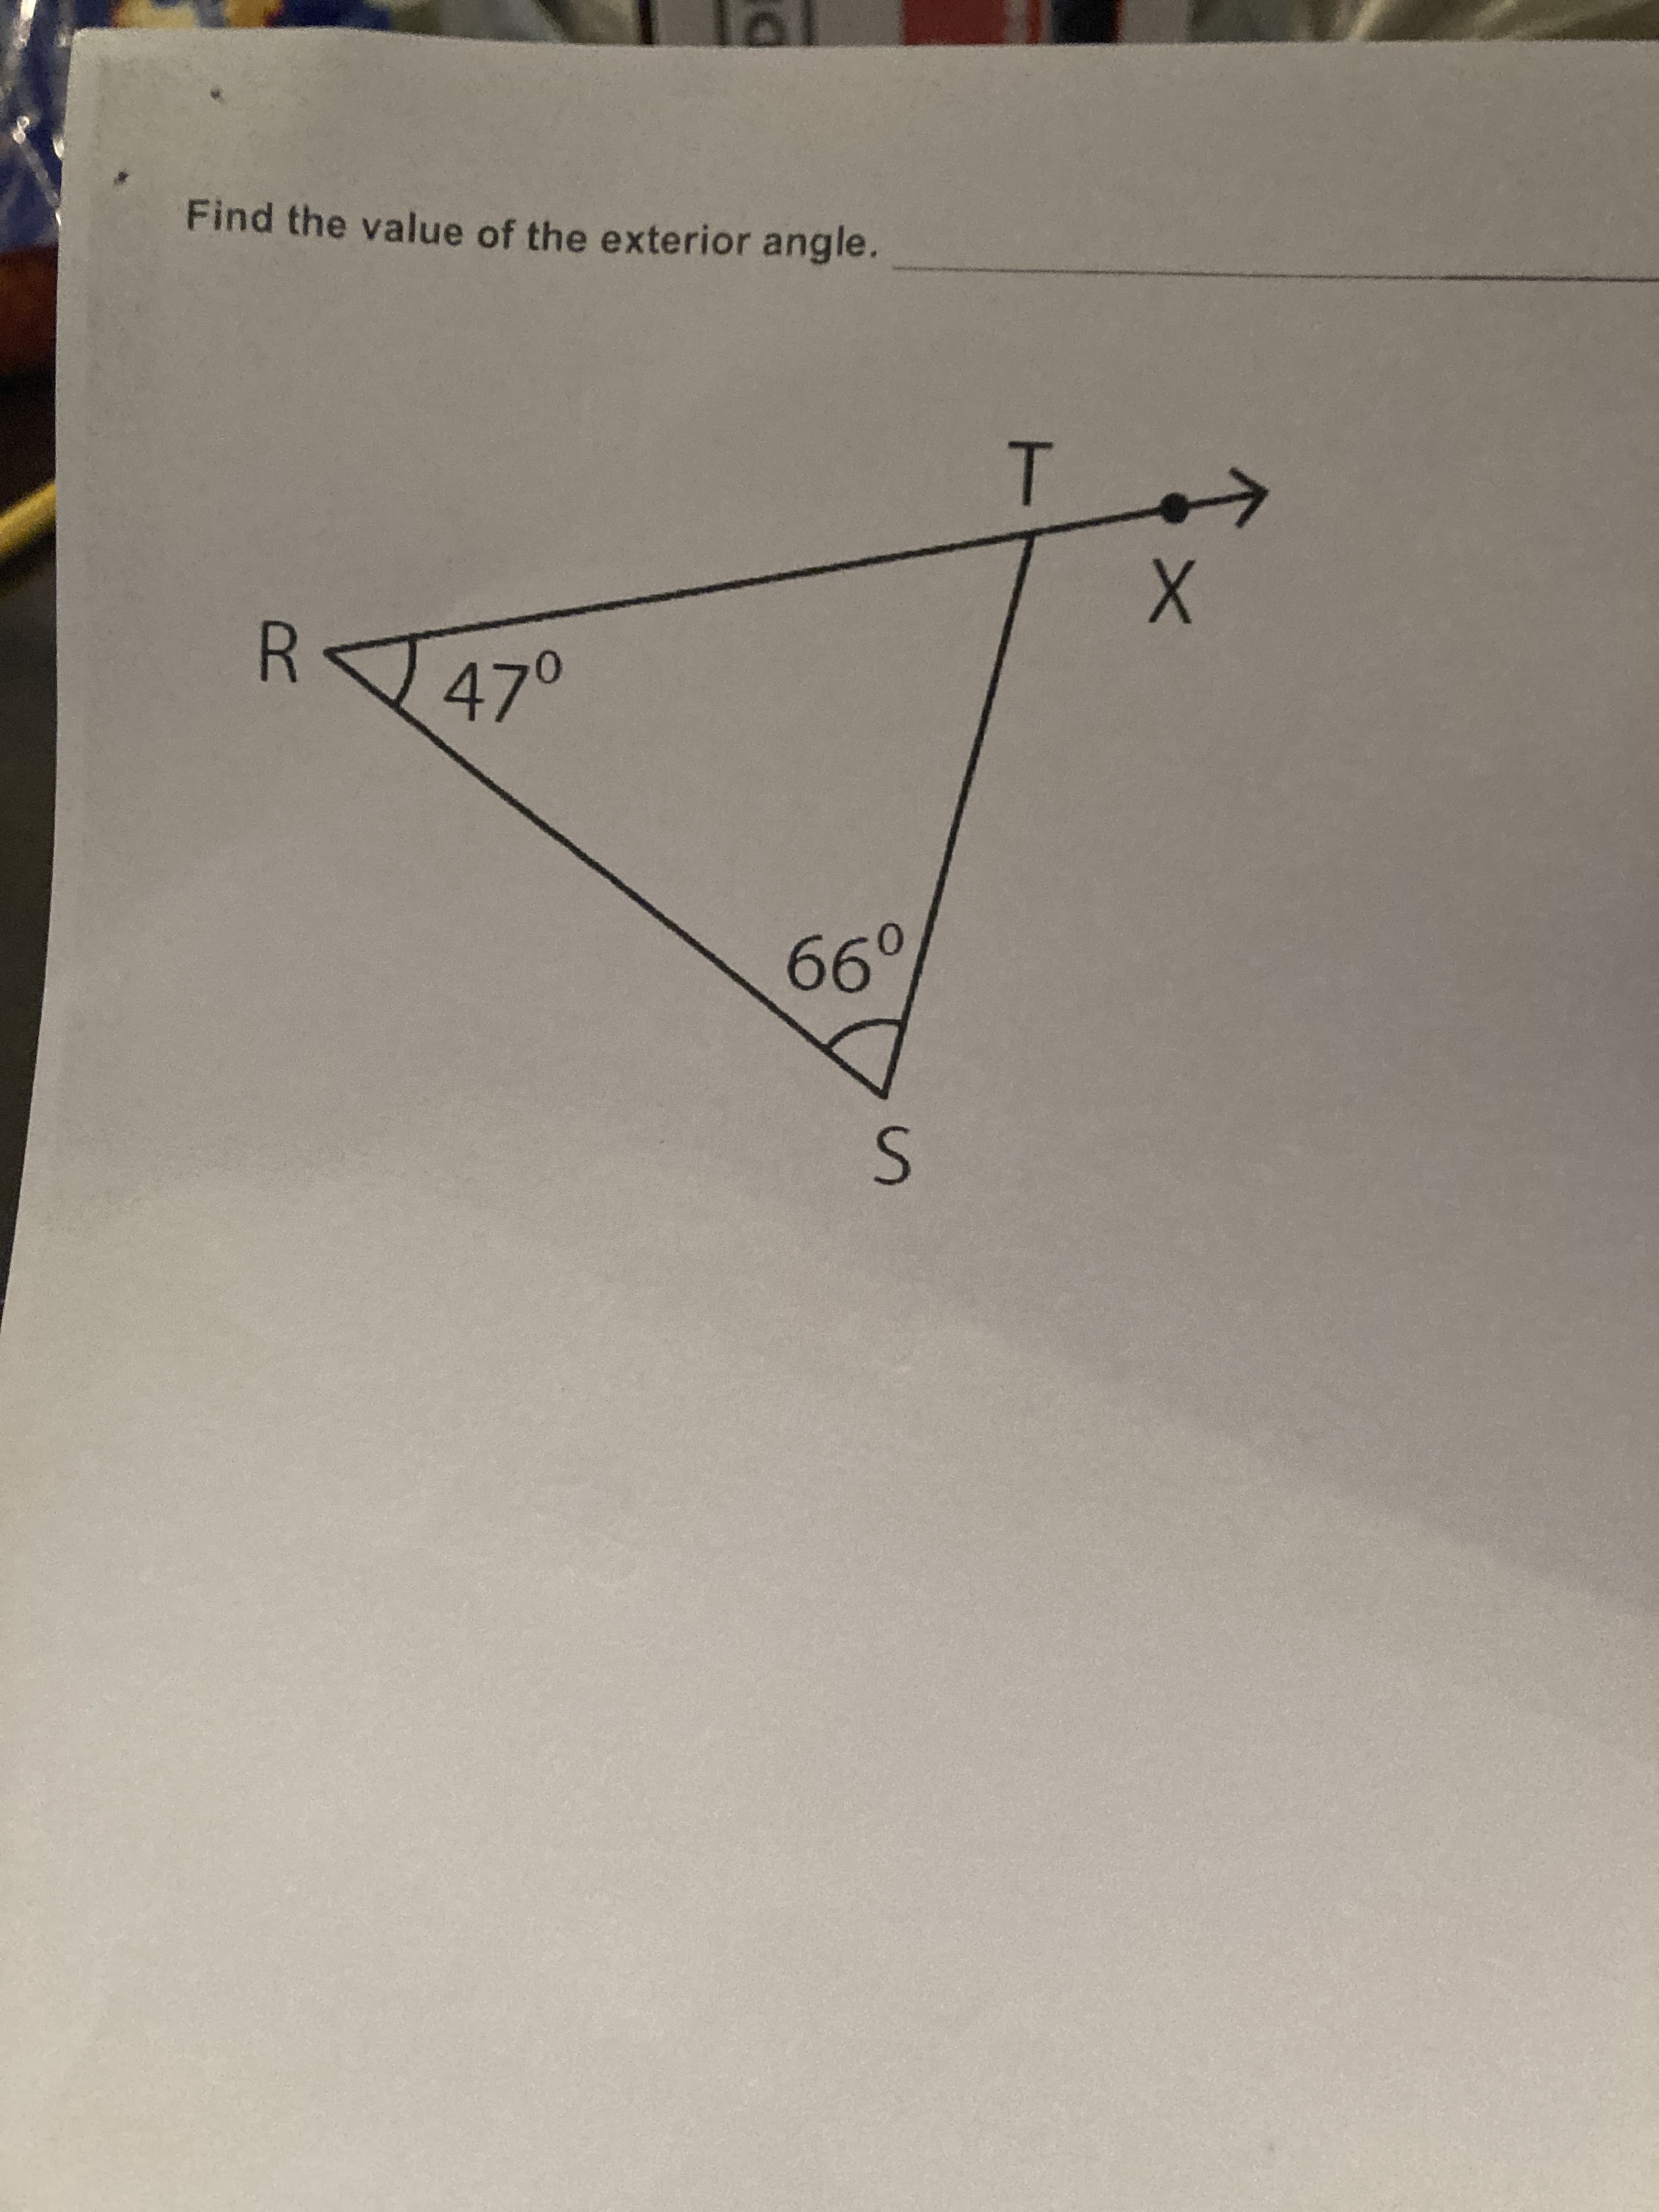 Find the value of the exterior angle.
T
R
470
66°
